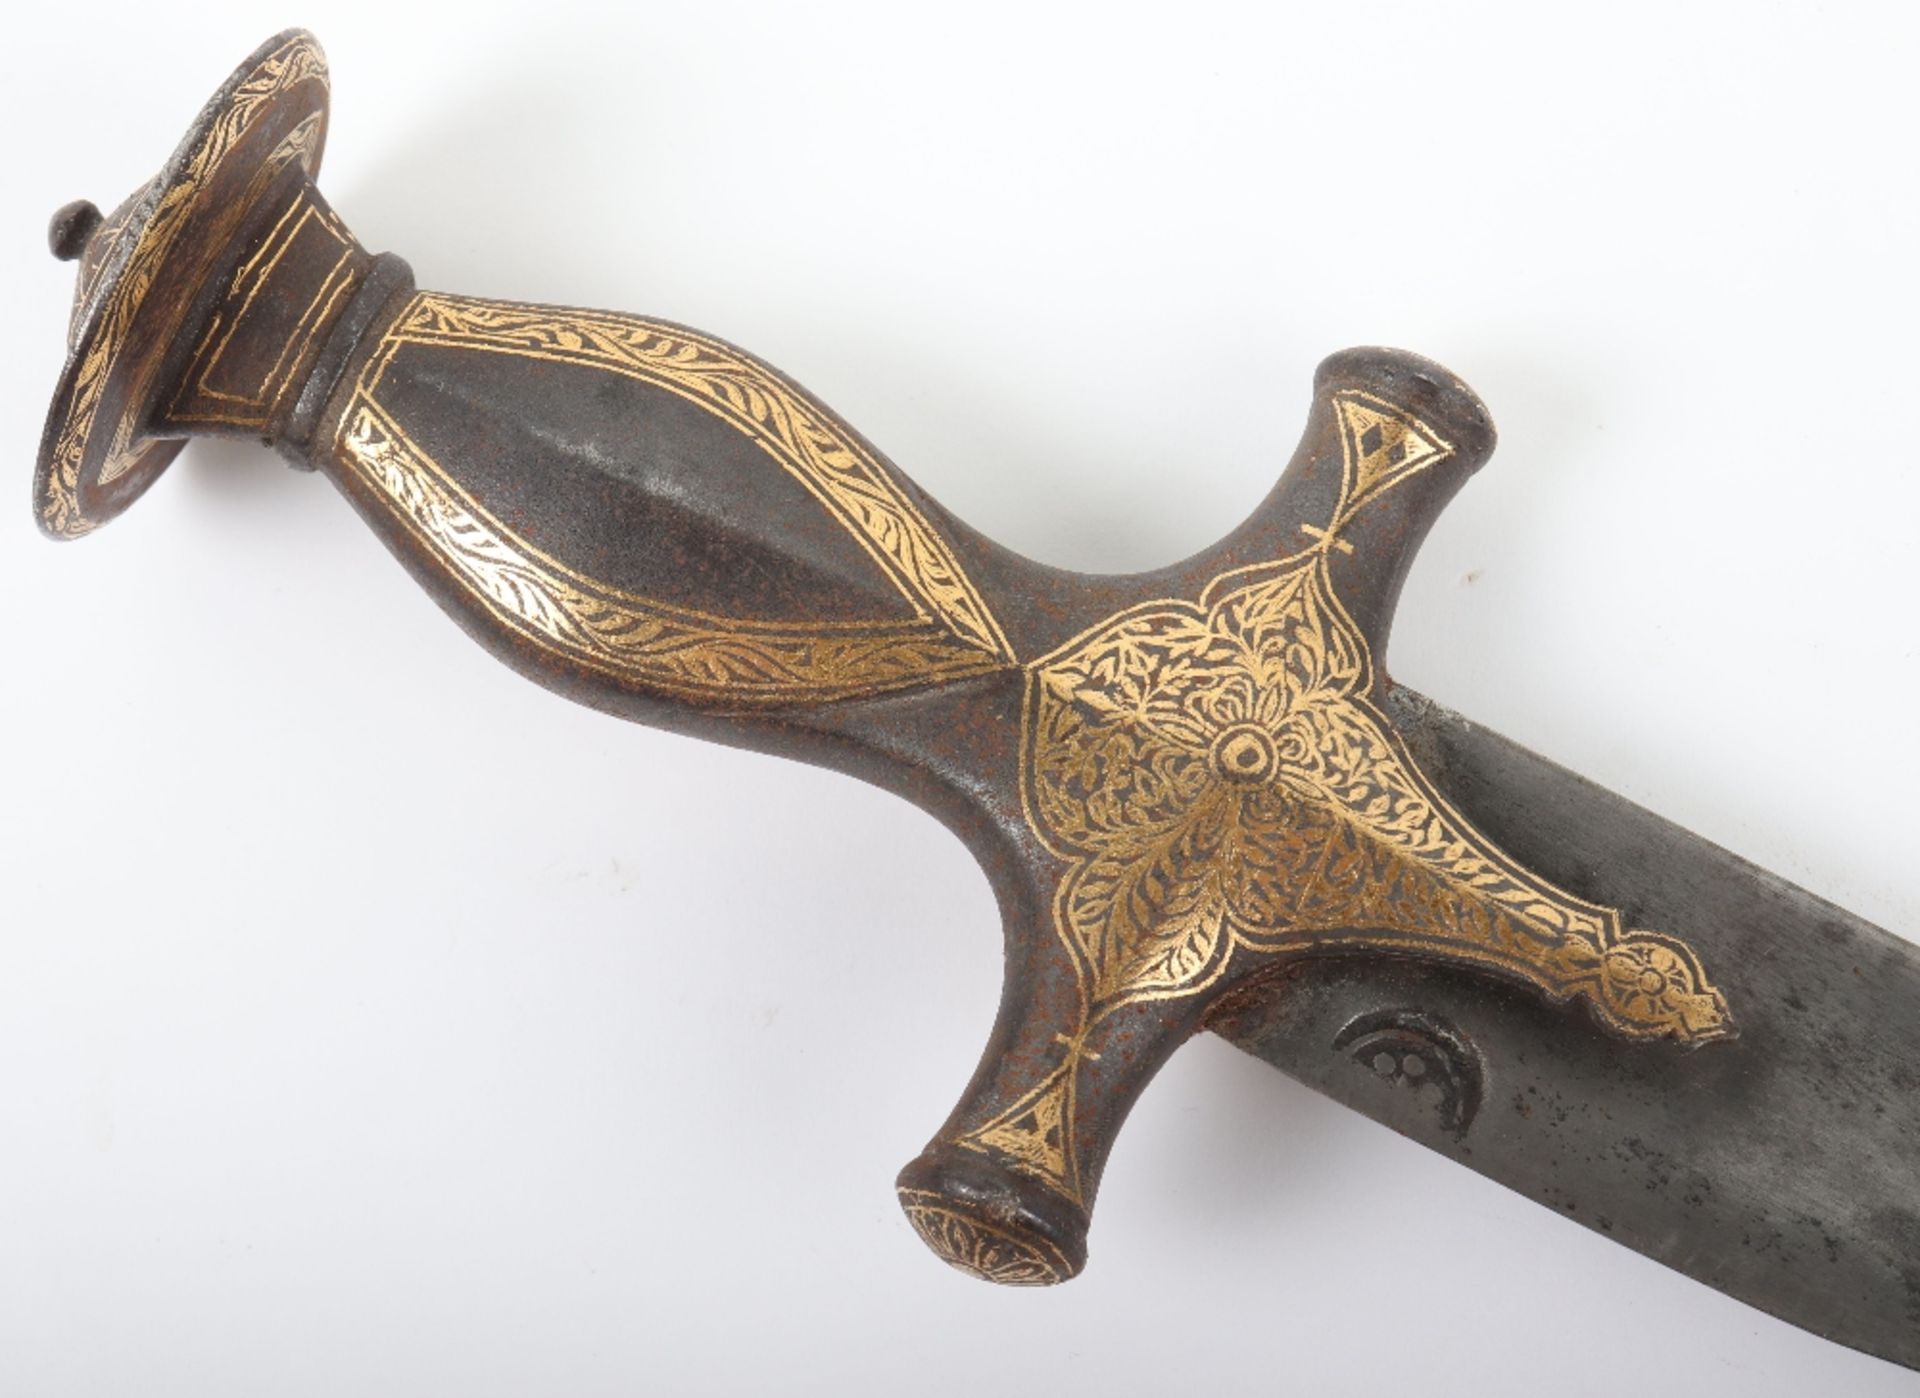 Decorative Indian Sword Tulwar Perhaps for a Youth - Image 3 of 13